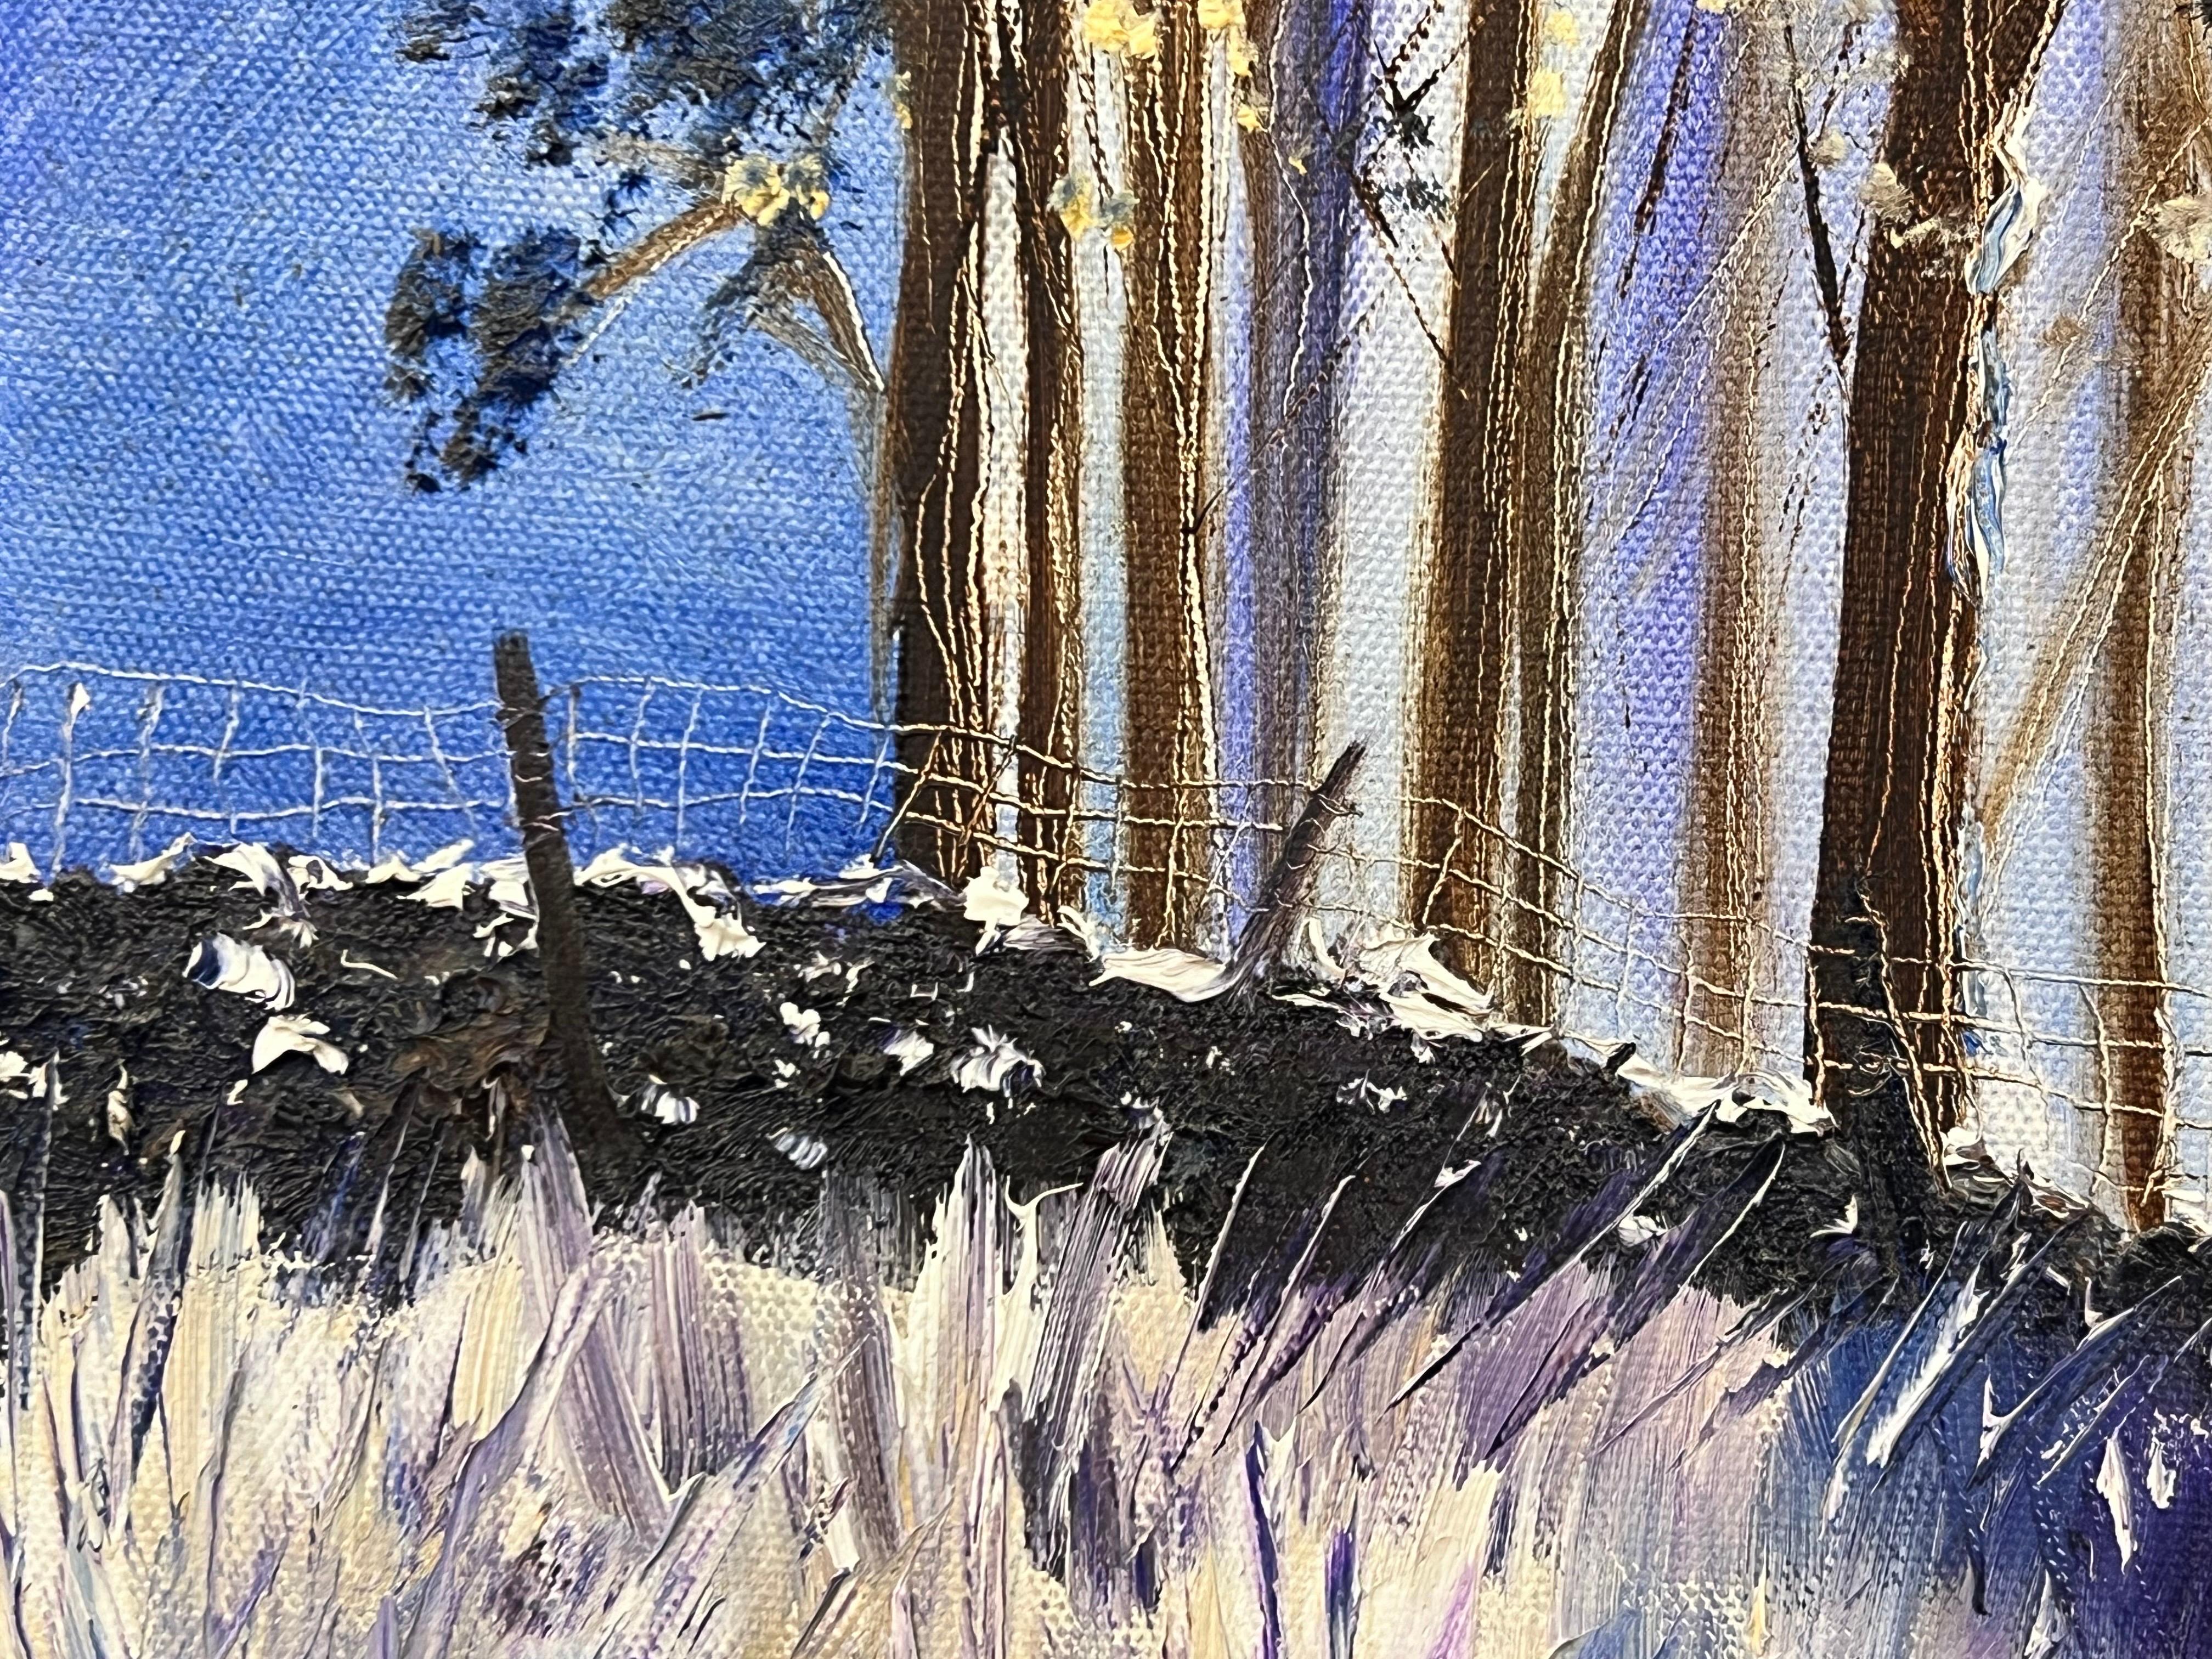 Winter Trees Yorkshire Dales Abstract Landscape Oil Painting by British Artist For Sale 11